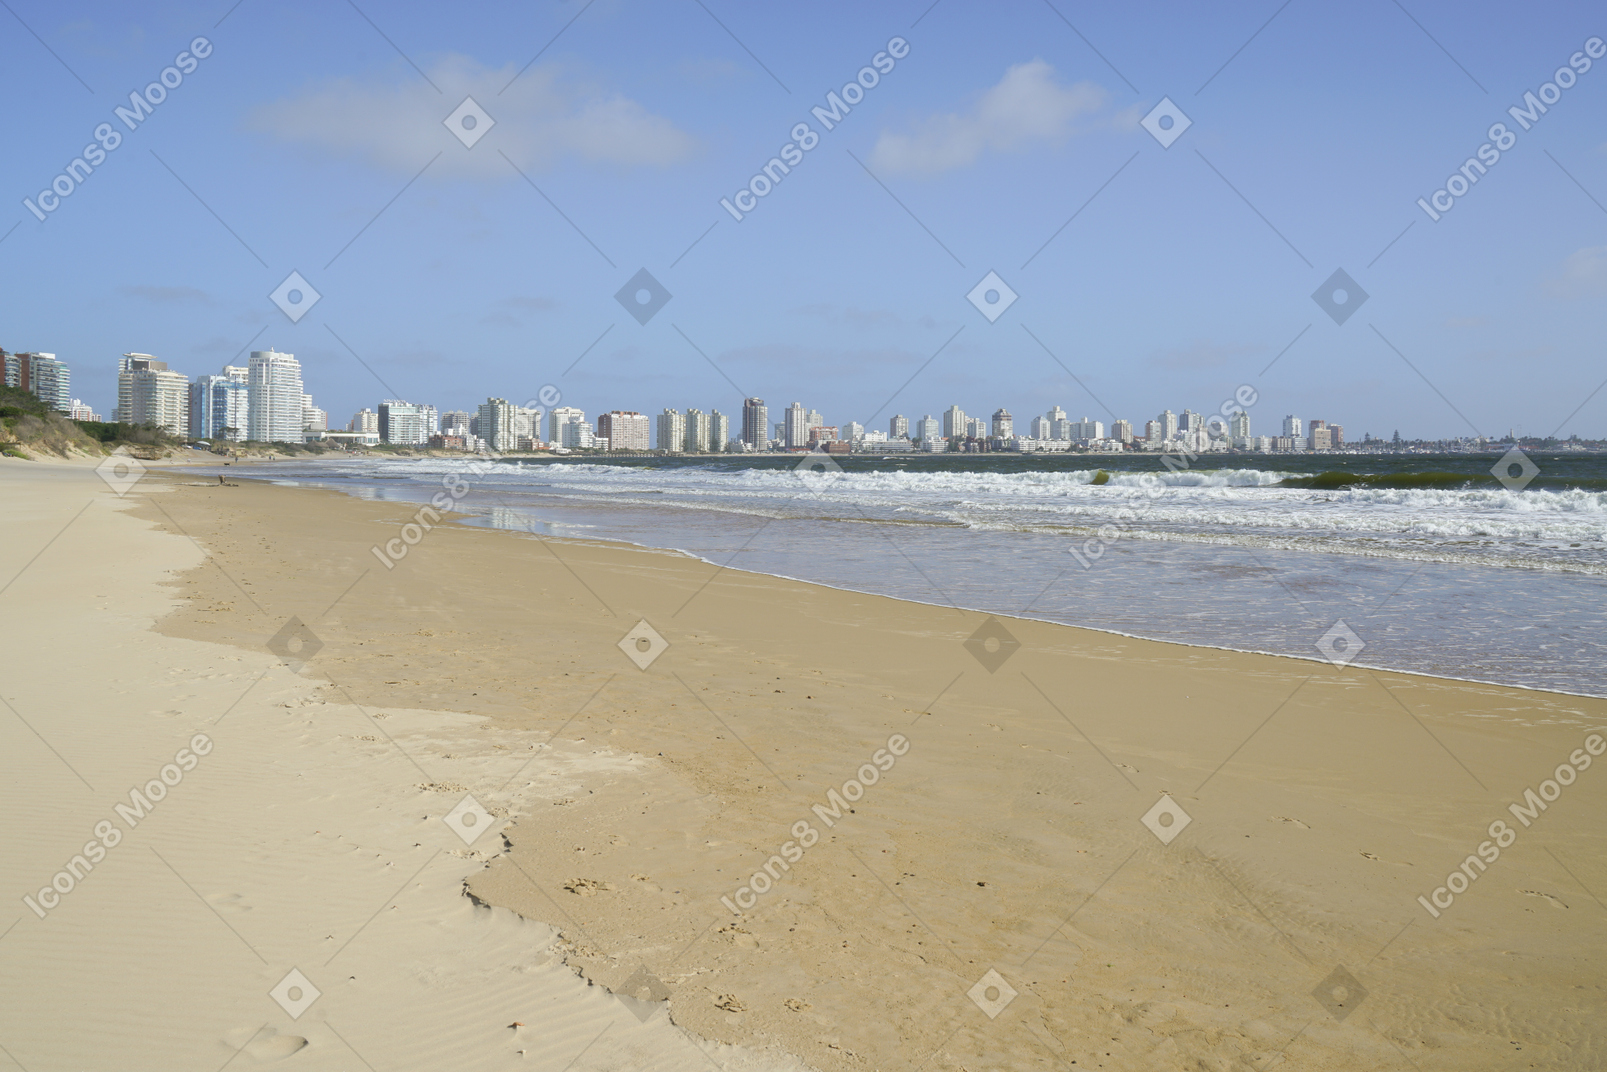 Ocean shore with a view of city skyline